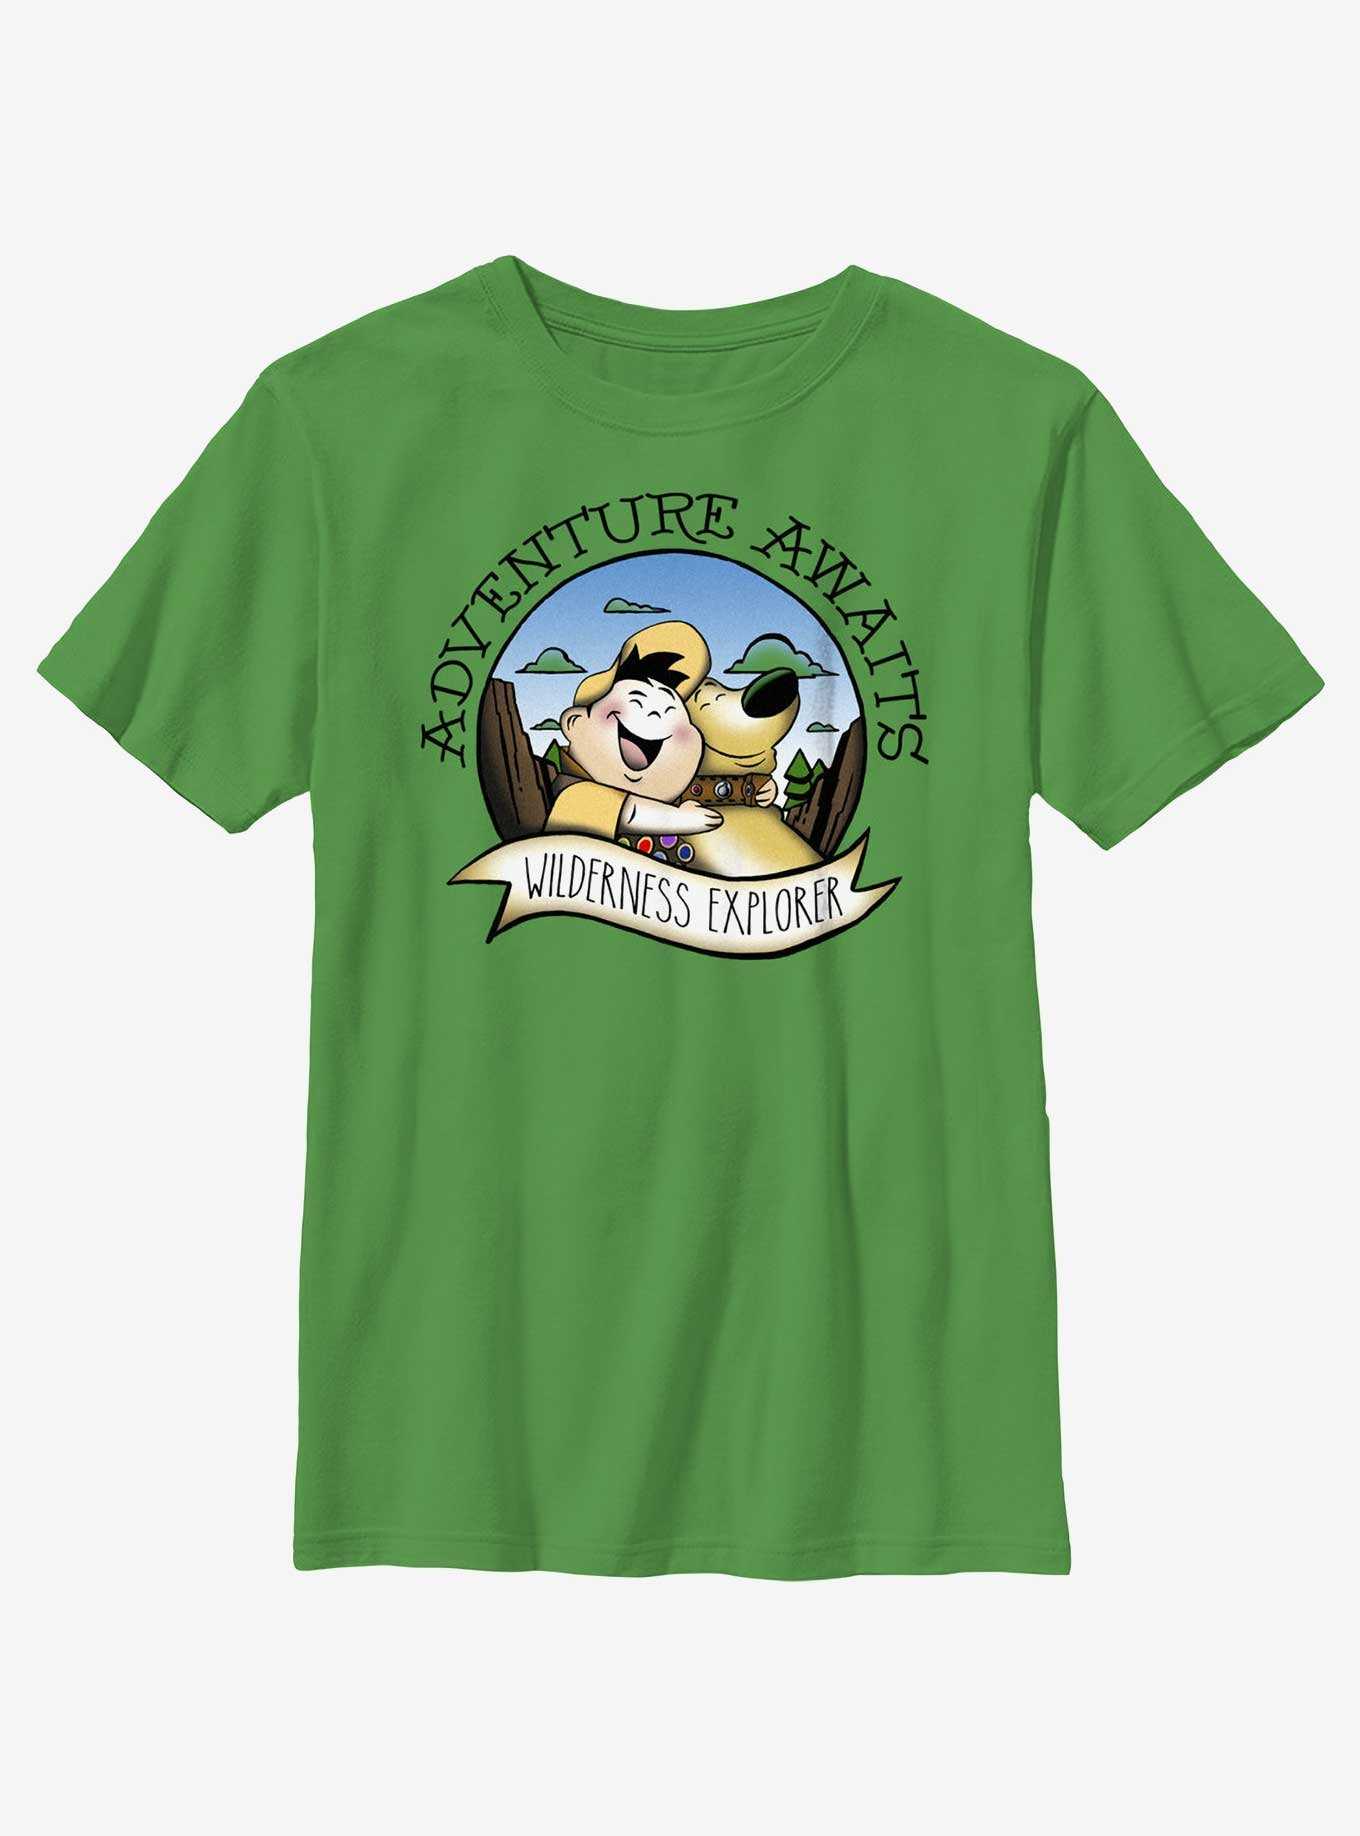 Disney Pixar Up Russell and Dug Wilderness Explorer Youth T-Shirt, , hi-res